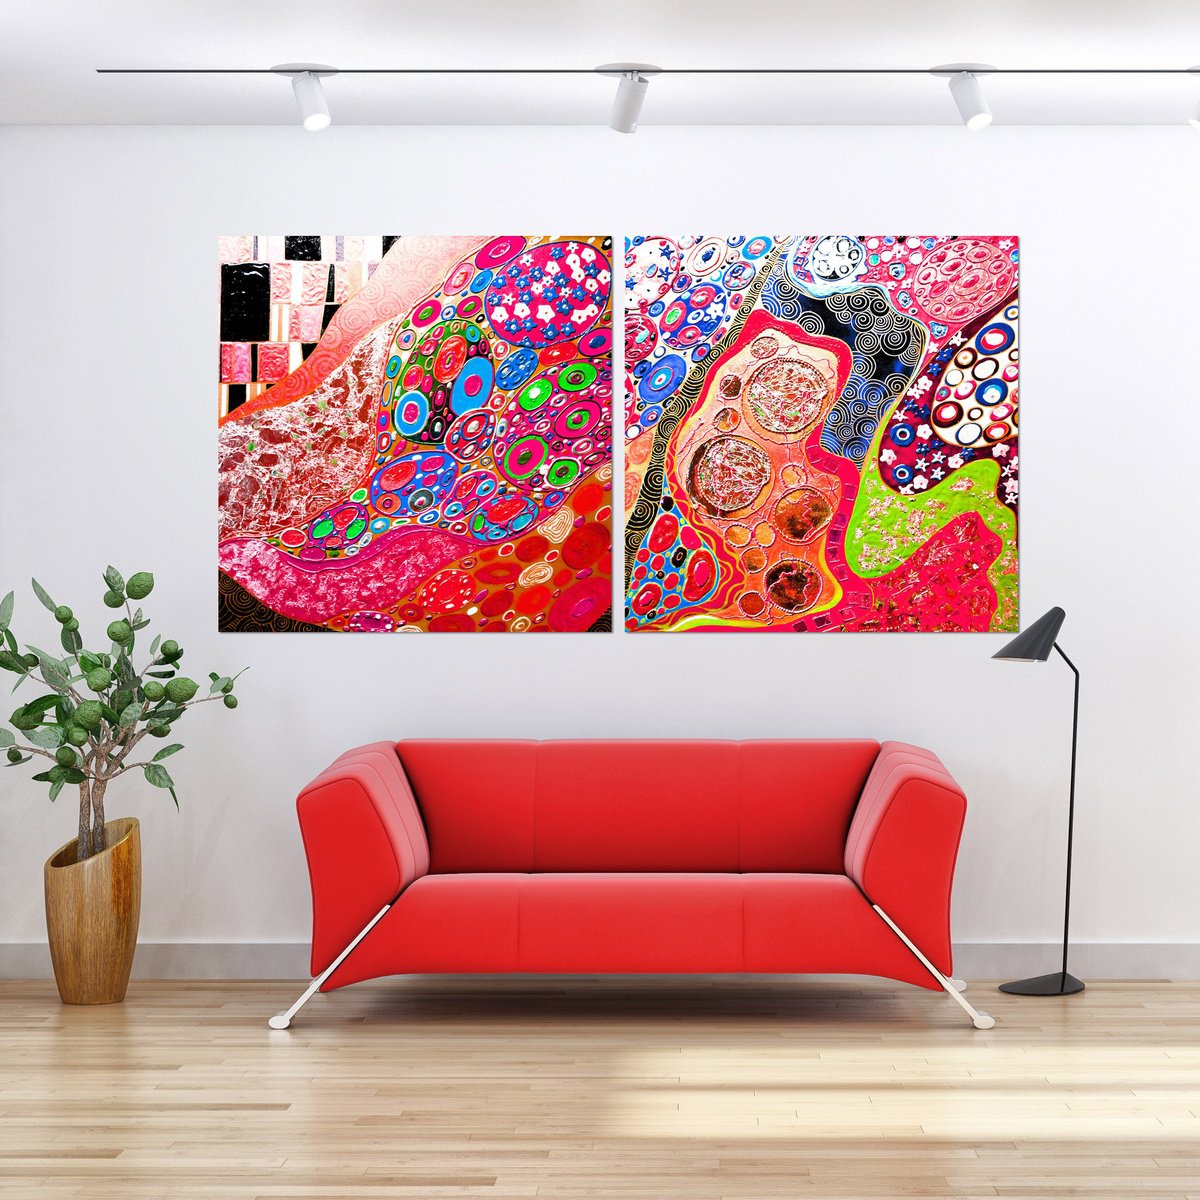 2 pieces 200?100 cm Abstract painting large wall art vivid red Viva Magenta relief diptych by BAST